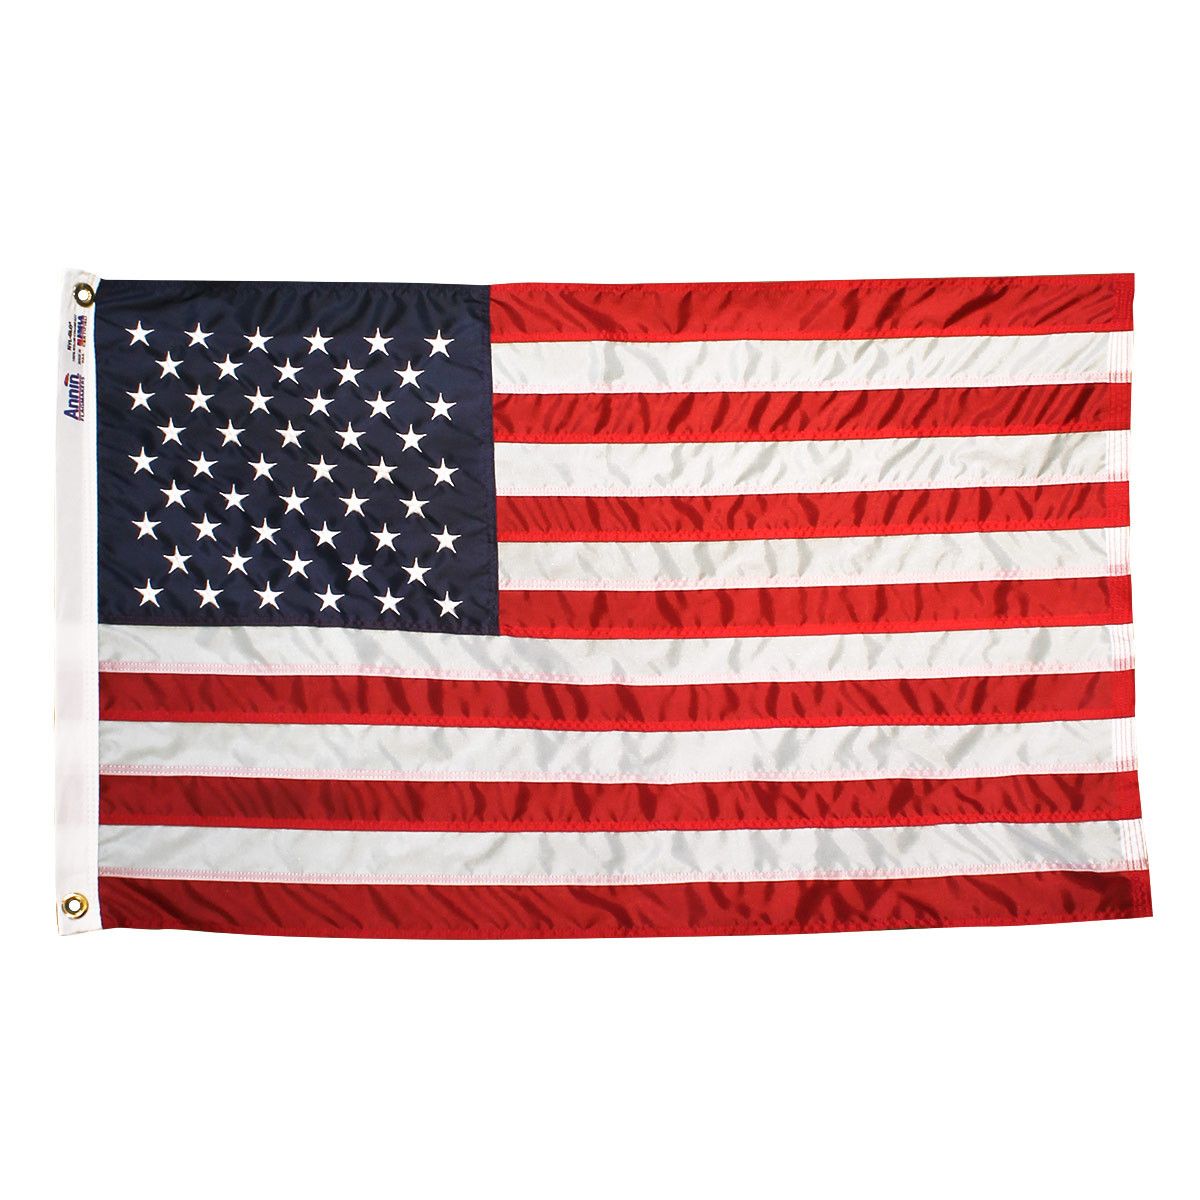 American Flag 3x5 ft. Nylon SolarGuard Nyl-Glo , 100% Made in USA with Sewn Stripes, Embroidered Stars and Brass Grommets. Annin 2460